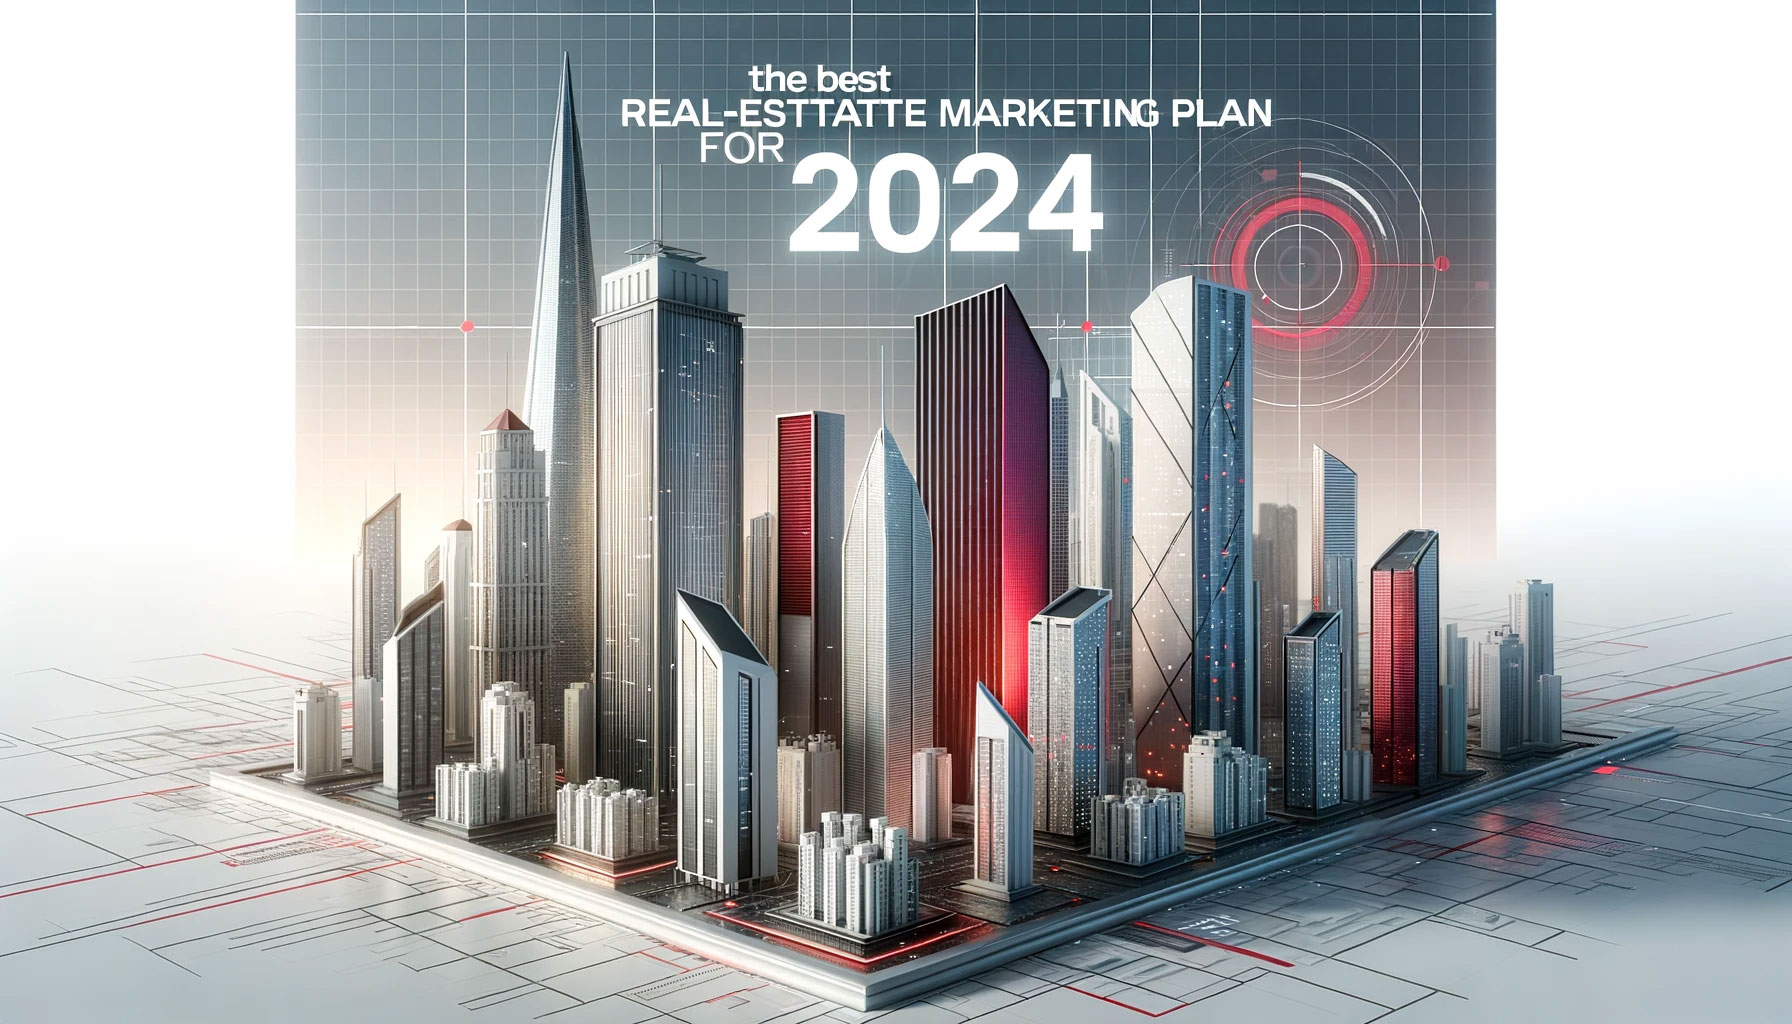 The Best Real-Estate Marketing Plan for 2024